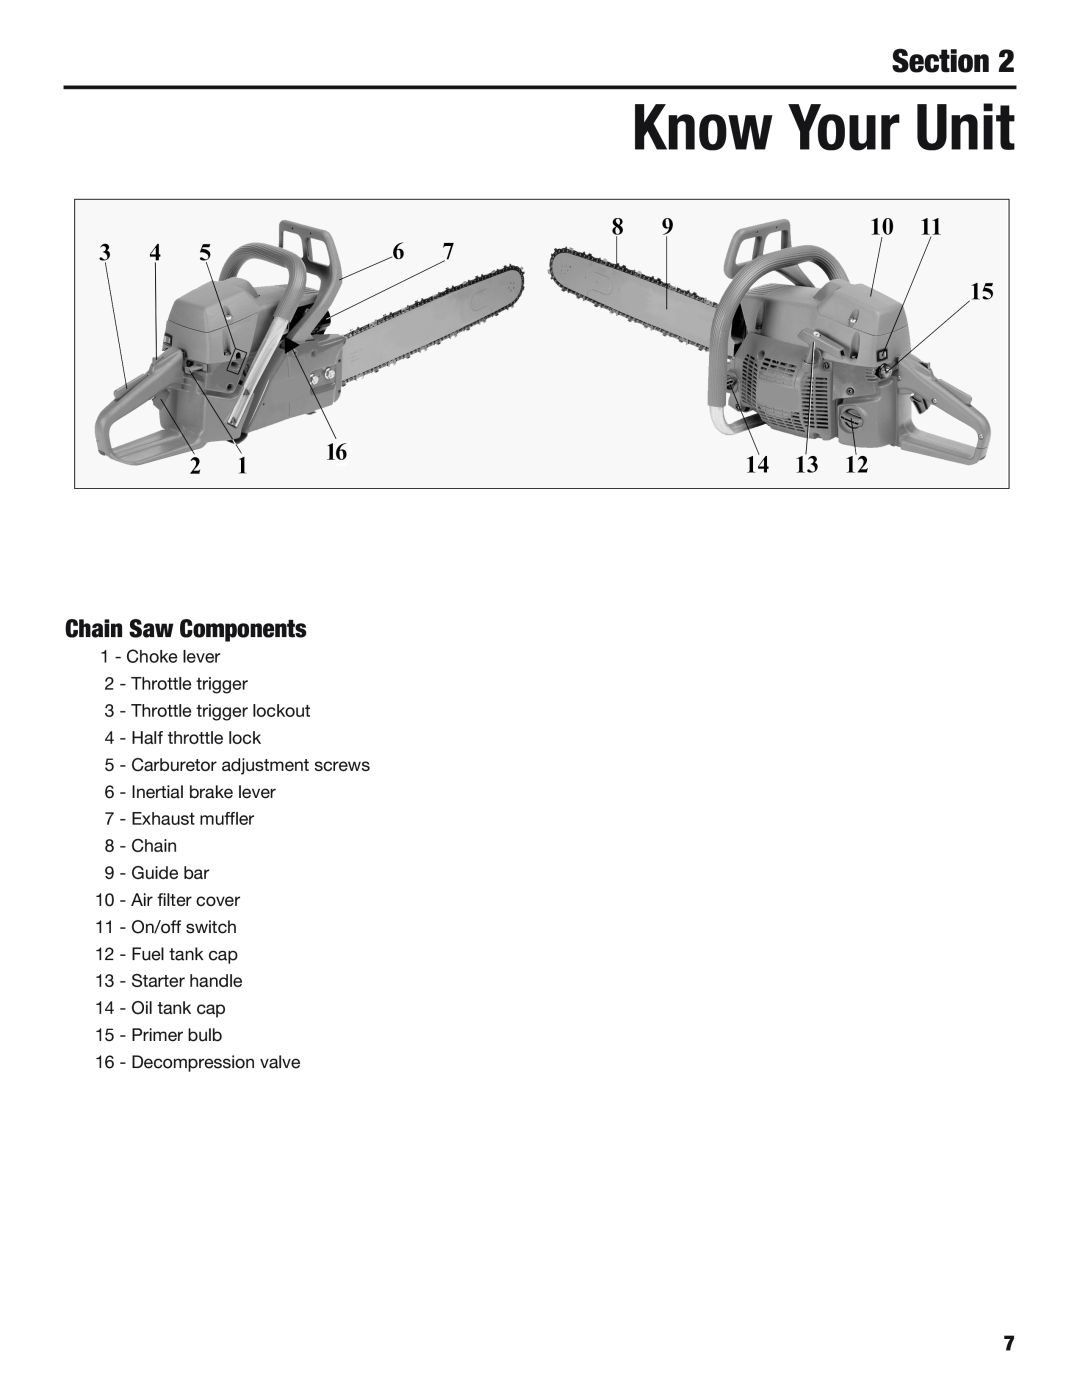 Cub Cadet CS5720 manual Know Your Unit, Chain Saw Components, Section 